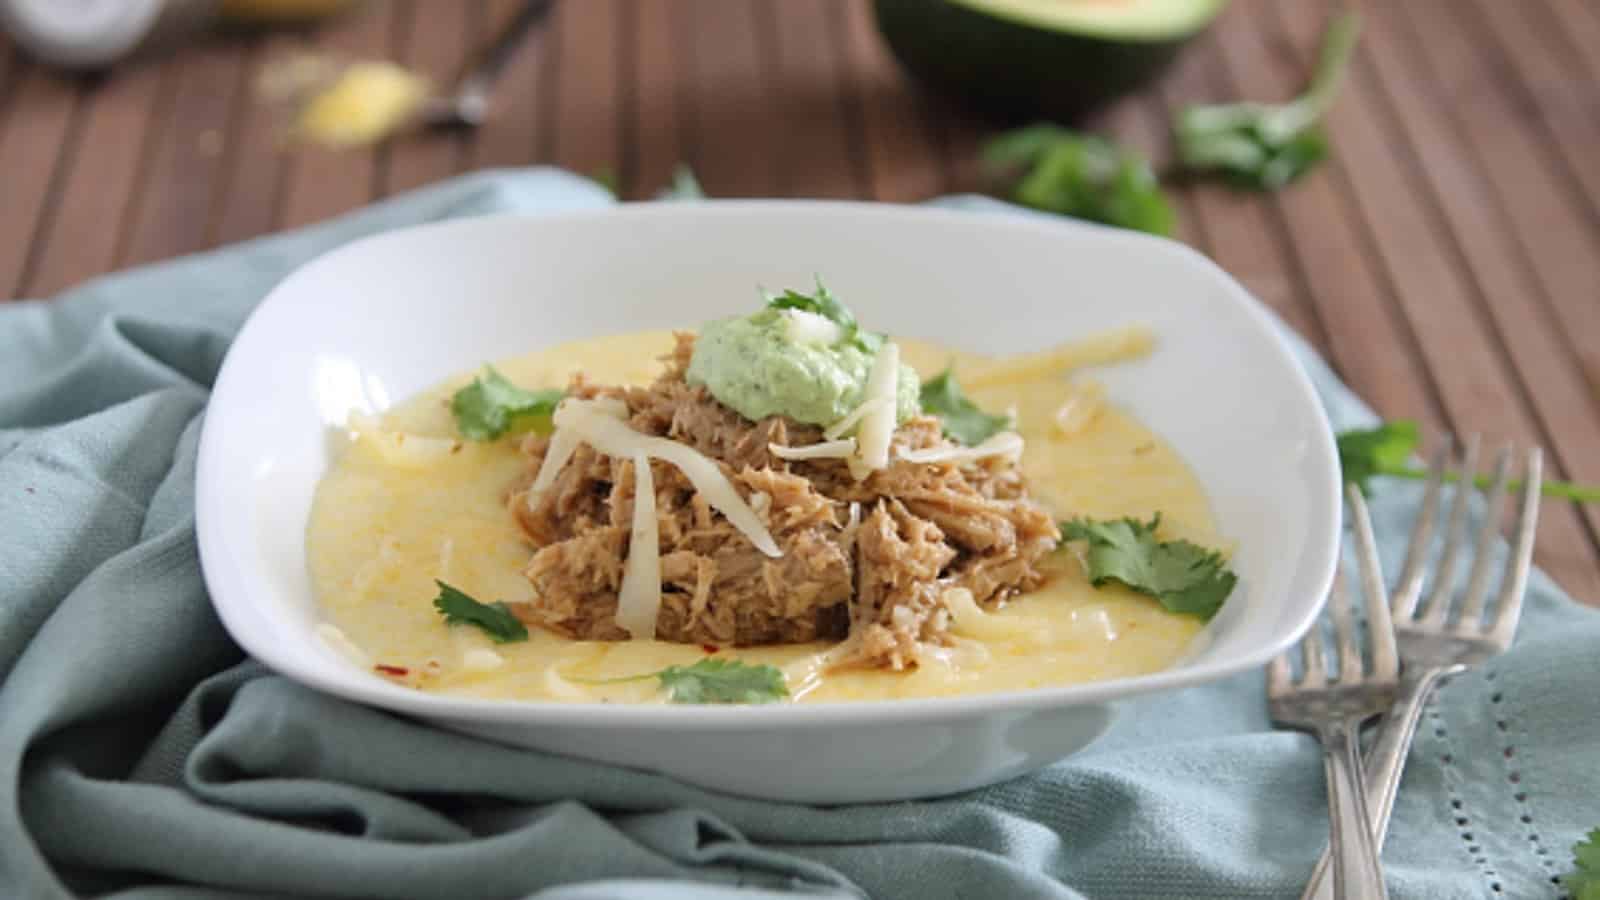 Slow cooker balsamic pulled pork over polenta with avocado crema in a white bowl.